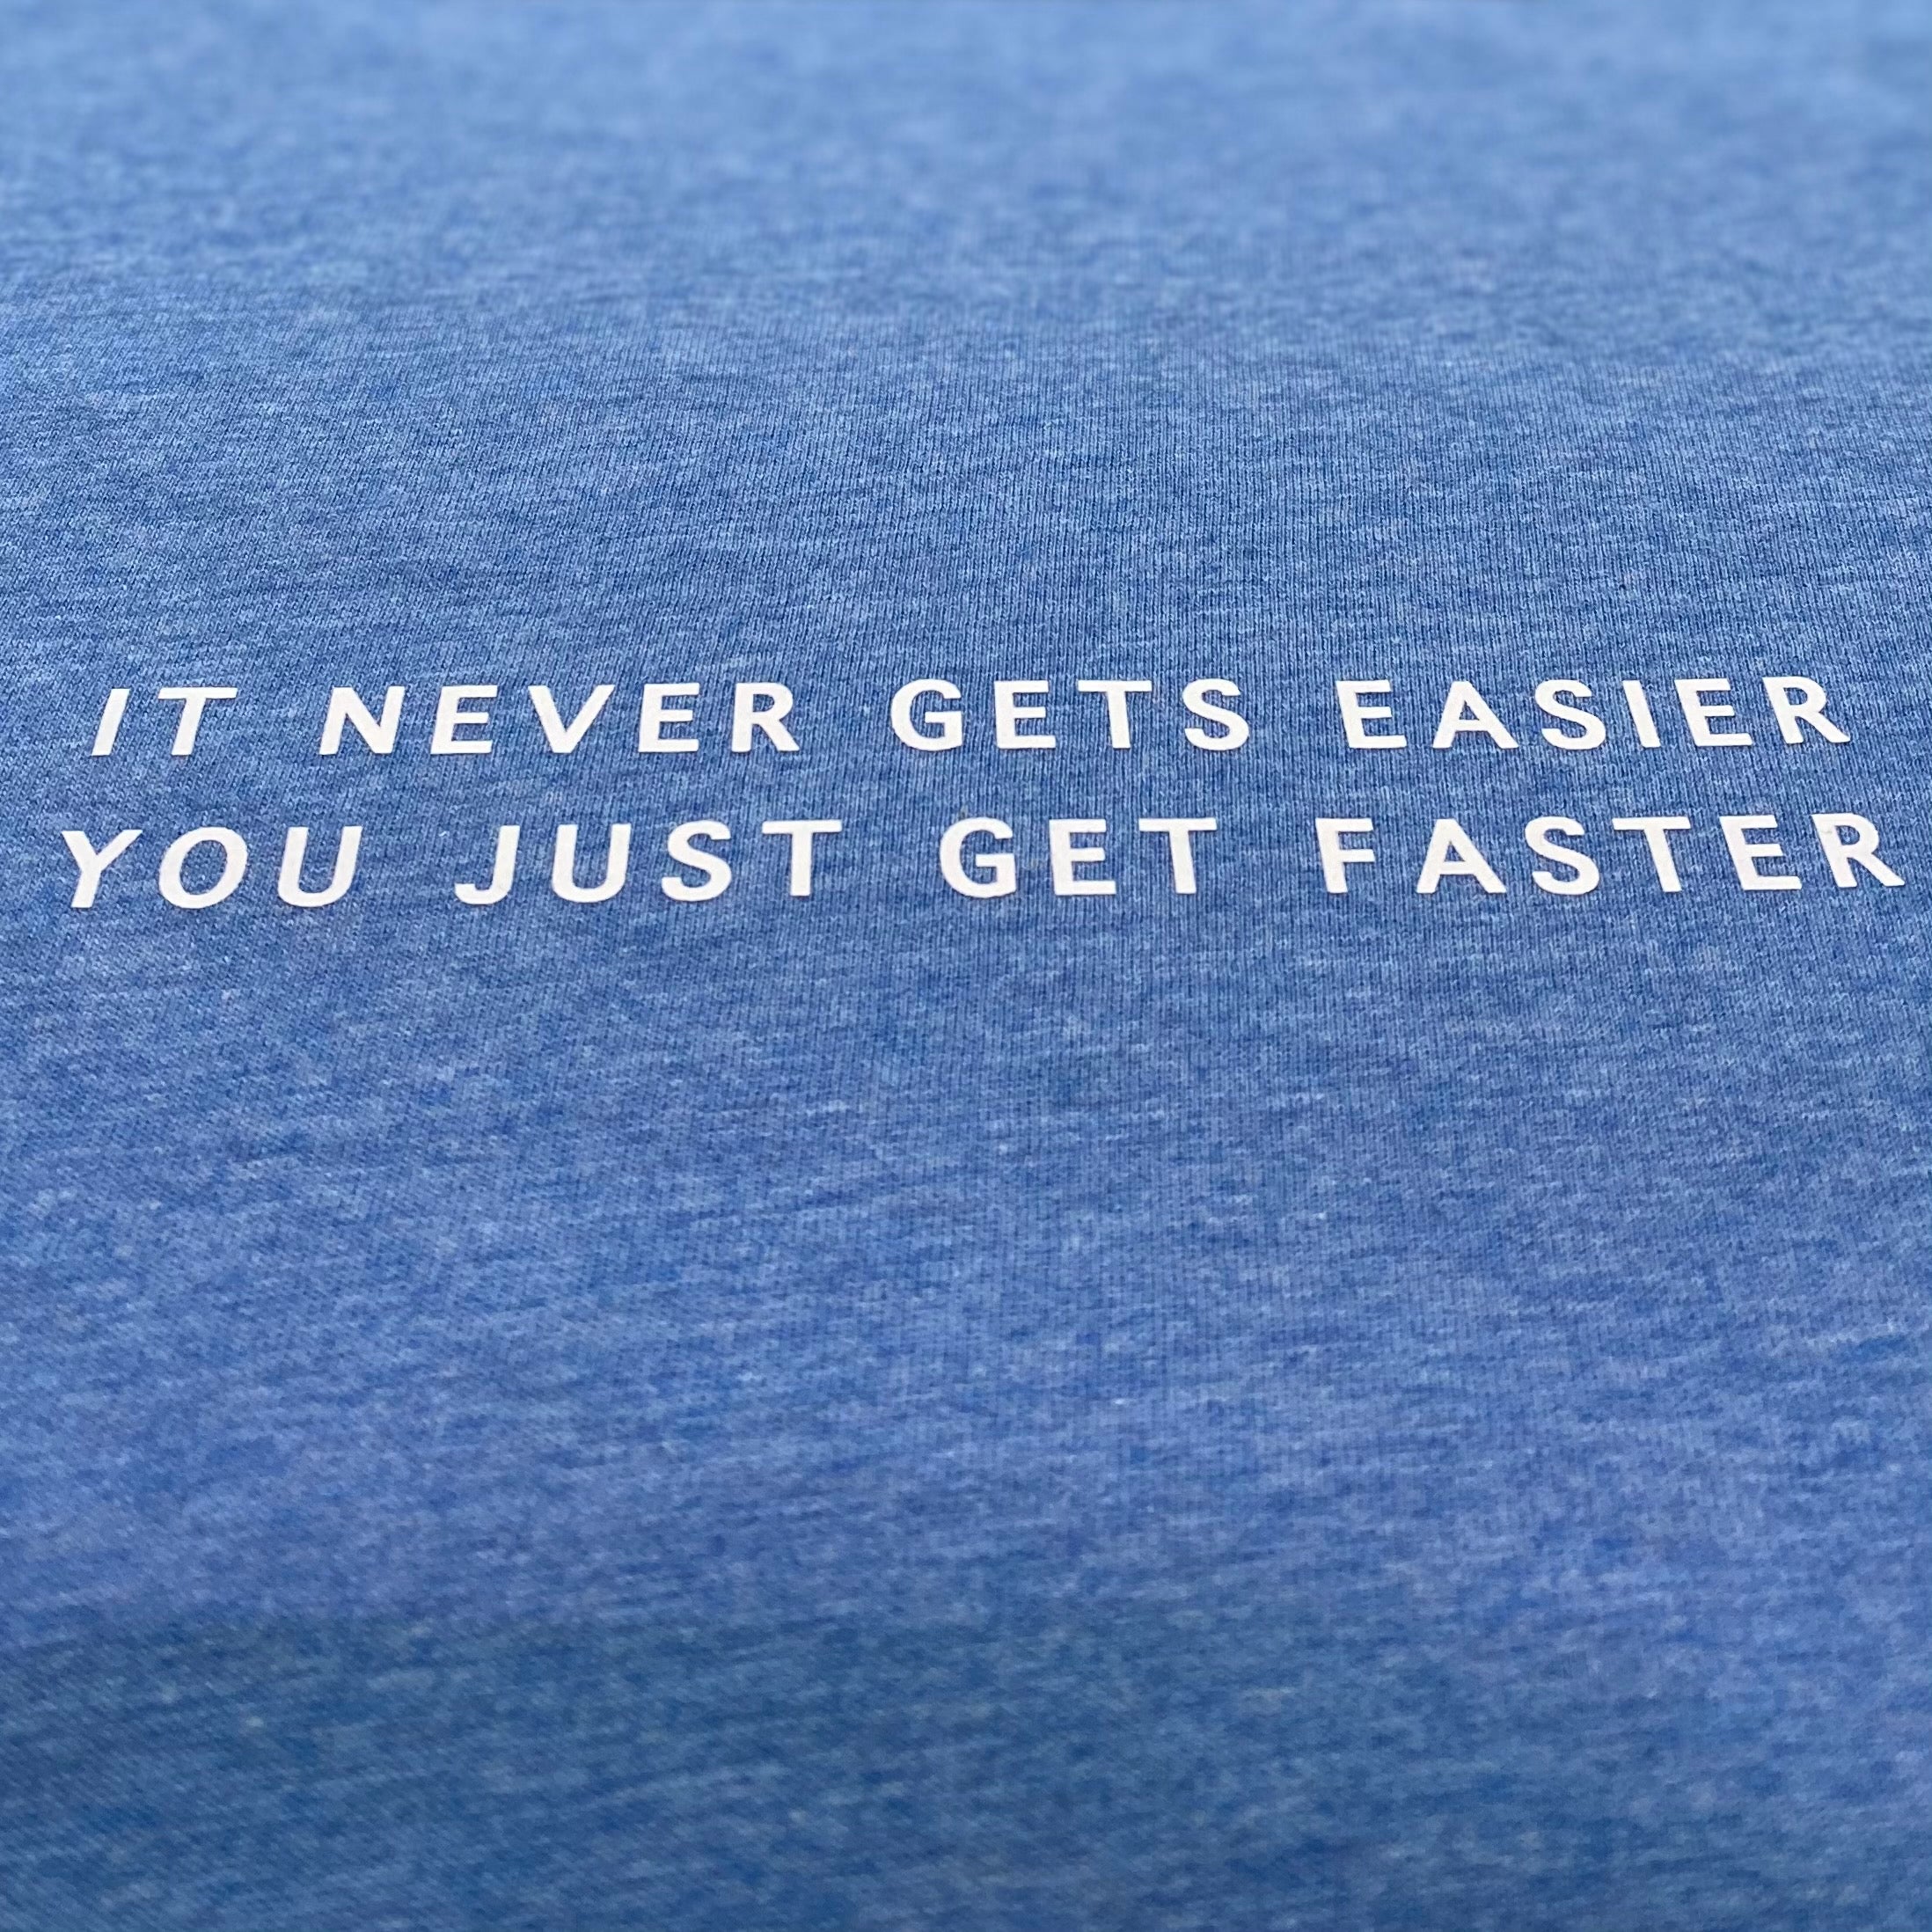 Women's It never gets easier, you just get faster Tee